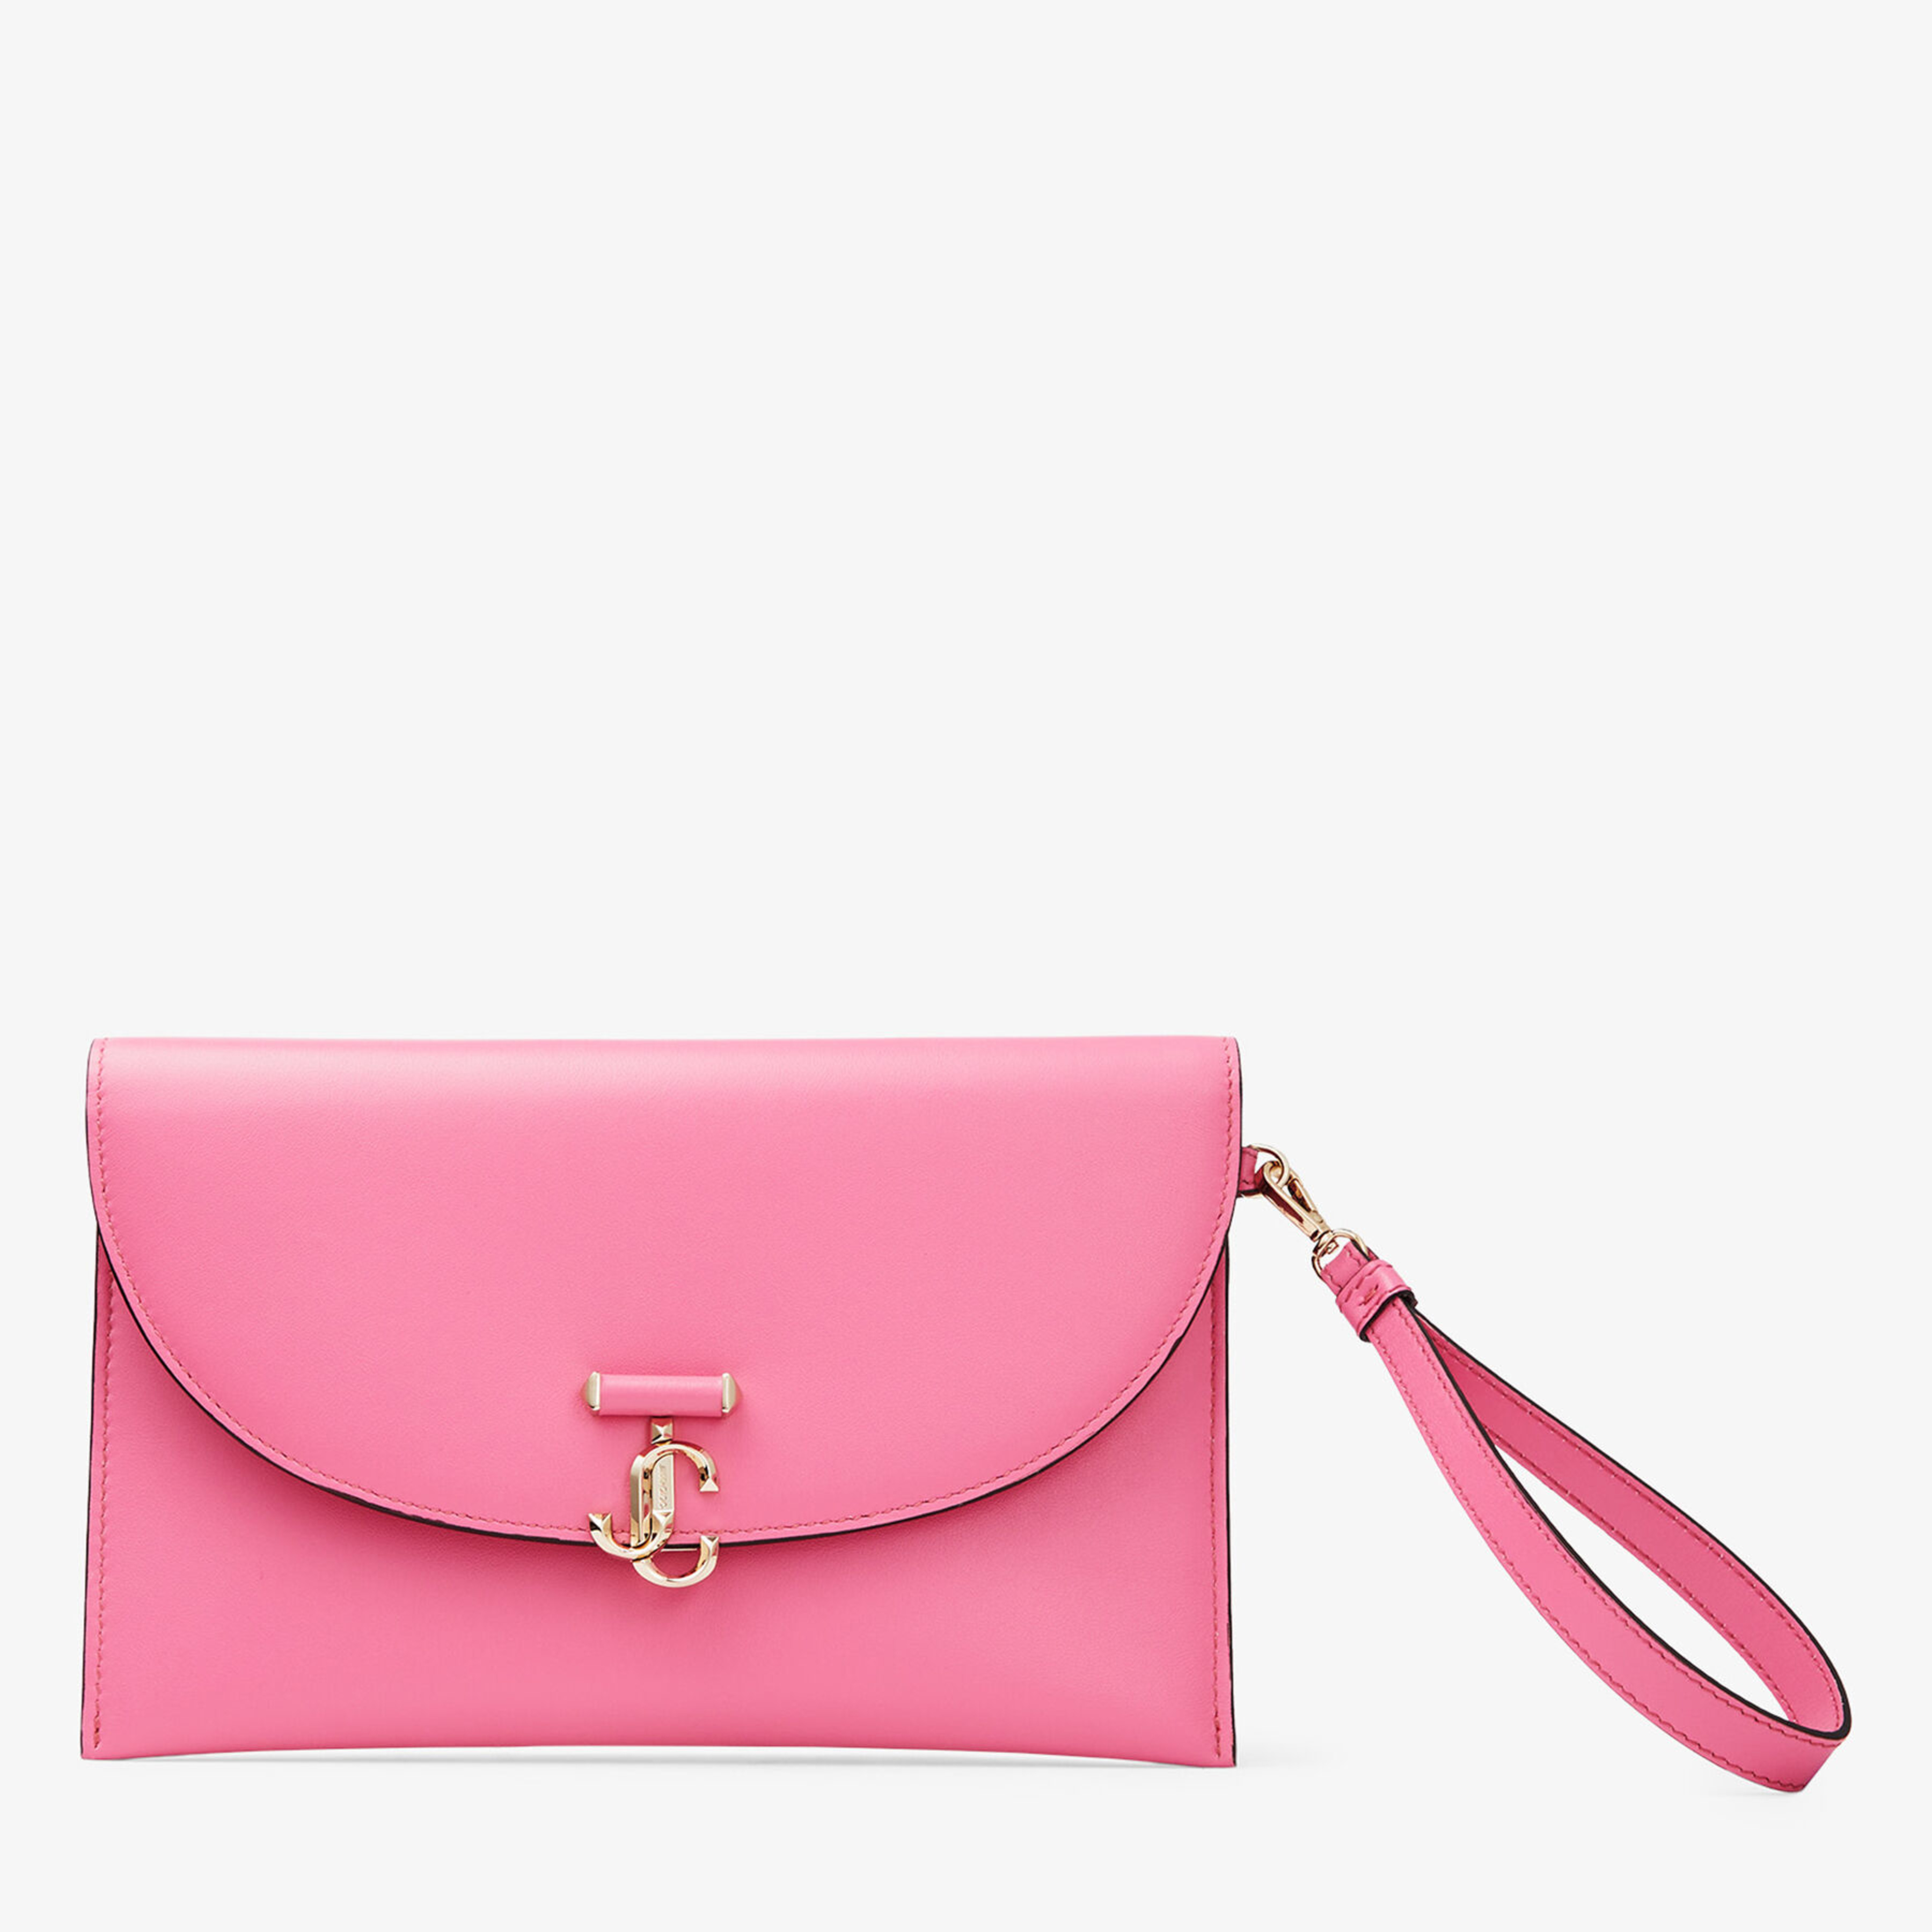 Jimmy Choo - Candy Pink Leather Pouch with Gold JC Emblem